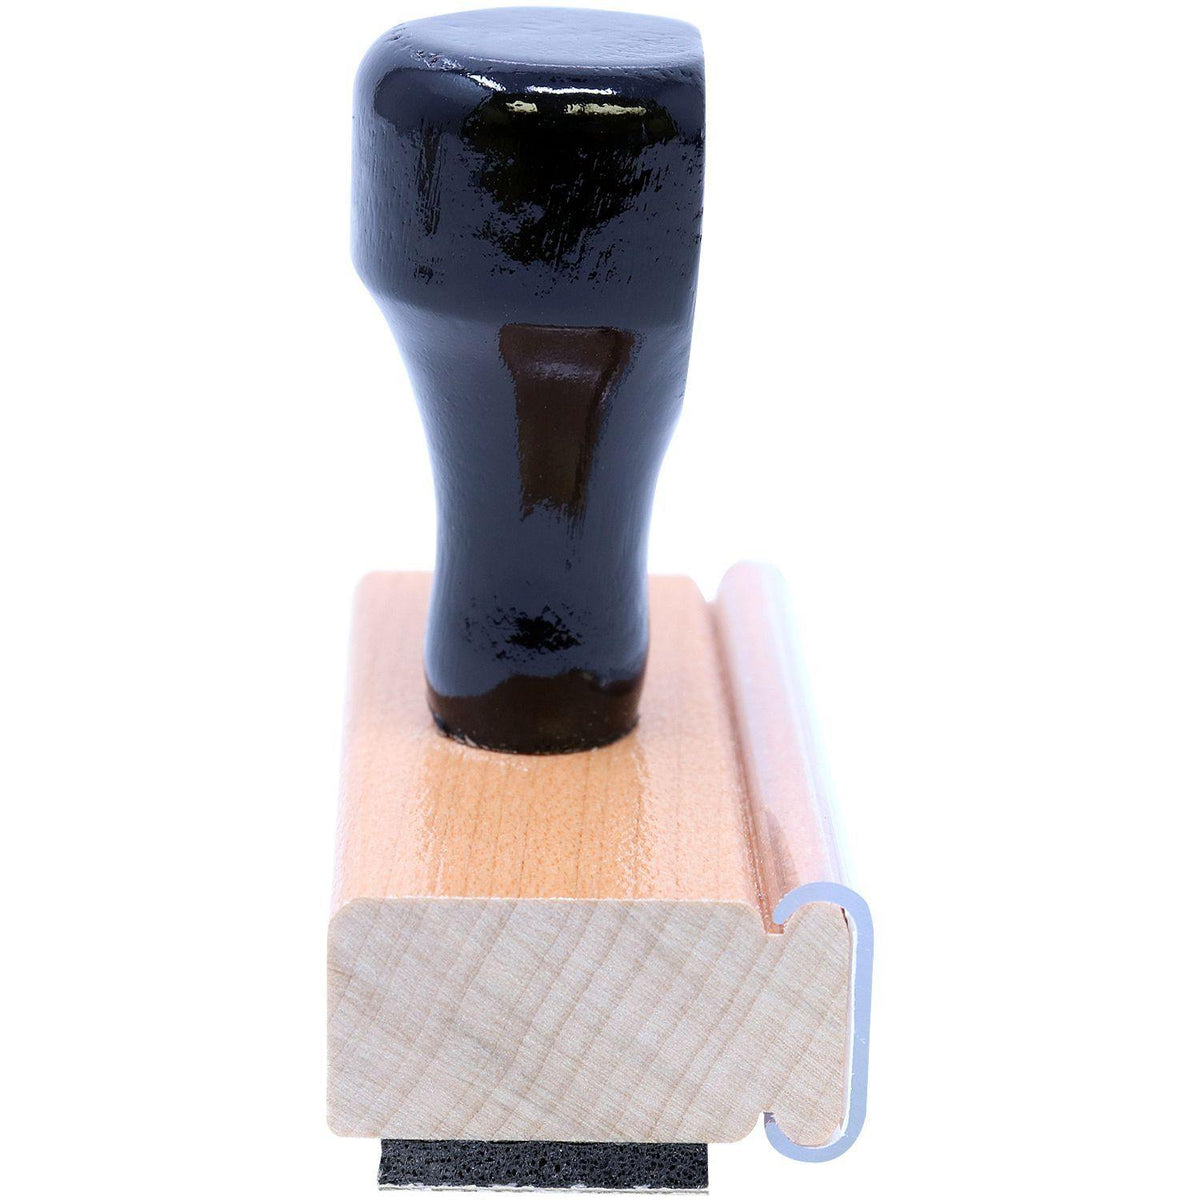 Round Bravo Rubber Stamp - Engineer Seal Stamps - Brand_Acorn, Impression Size_Small, Stamp Type_Regular Stamp, Type of Use_General, Type of Use_Teacher